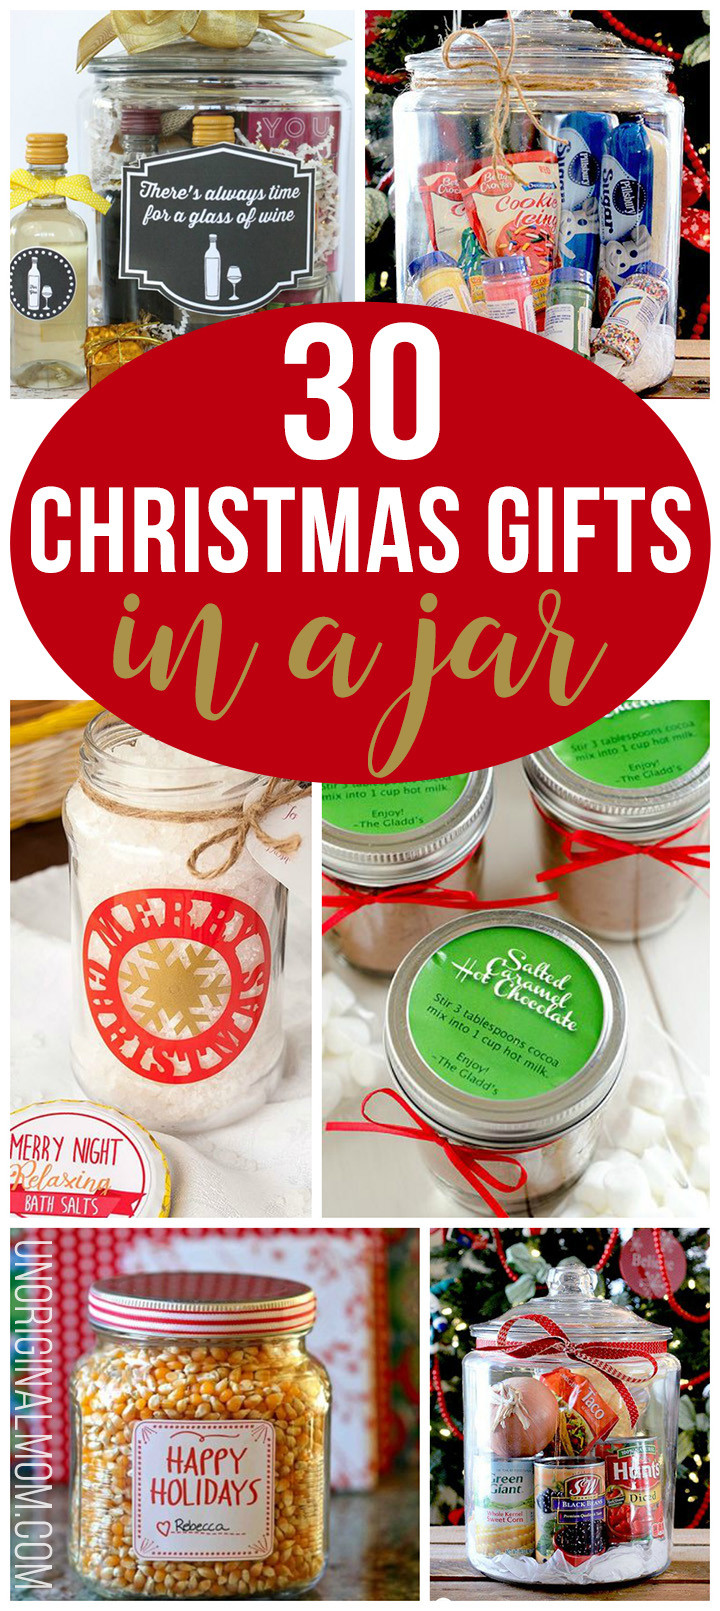 Pinterest Holiday Gift Ideas
 30 Christmas Gifts in a Jar unOriginal Mom